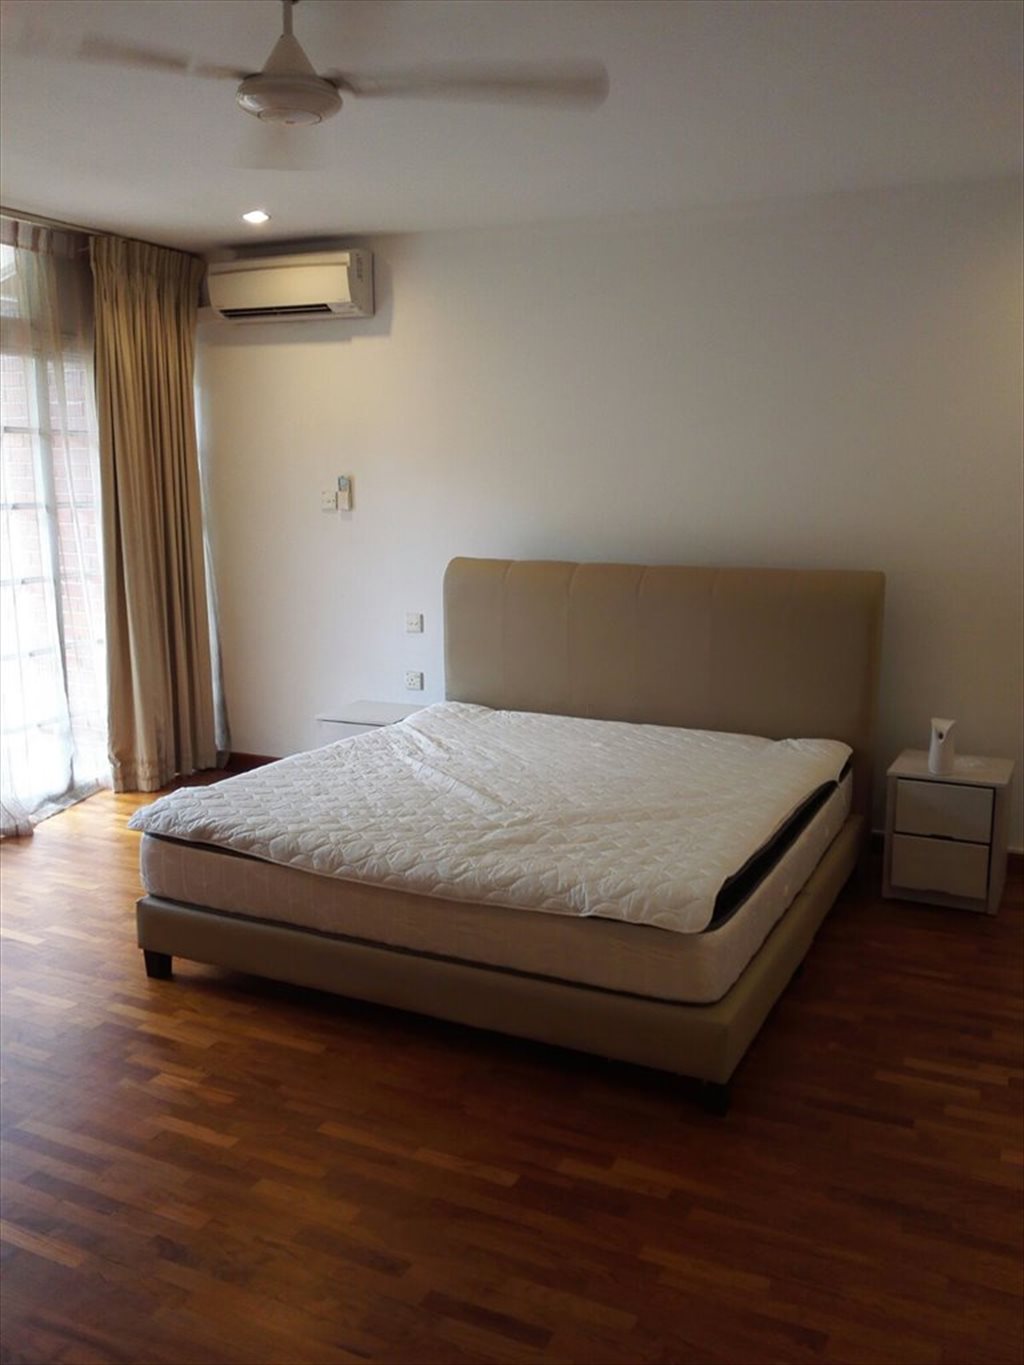 Room For Rent In Mount Faber Road Mount Faber D1 8 City South West No Owner Staying Near Harbourfront Mrt Station 2 Master Rooms In Penthouse